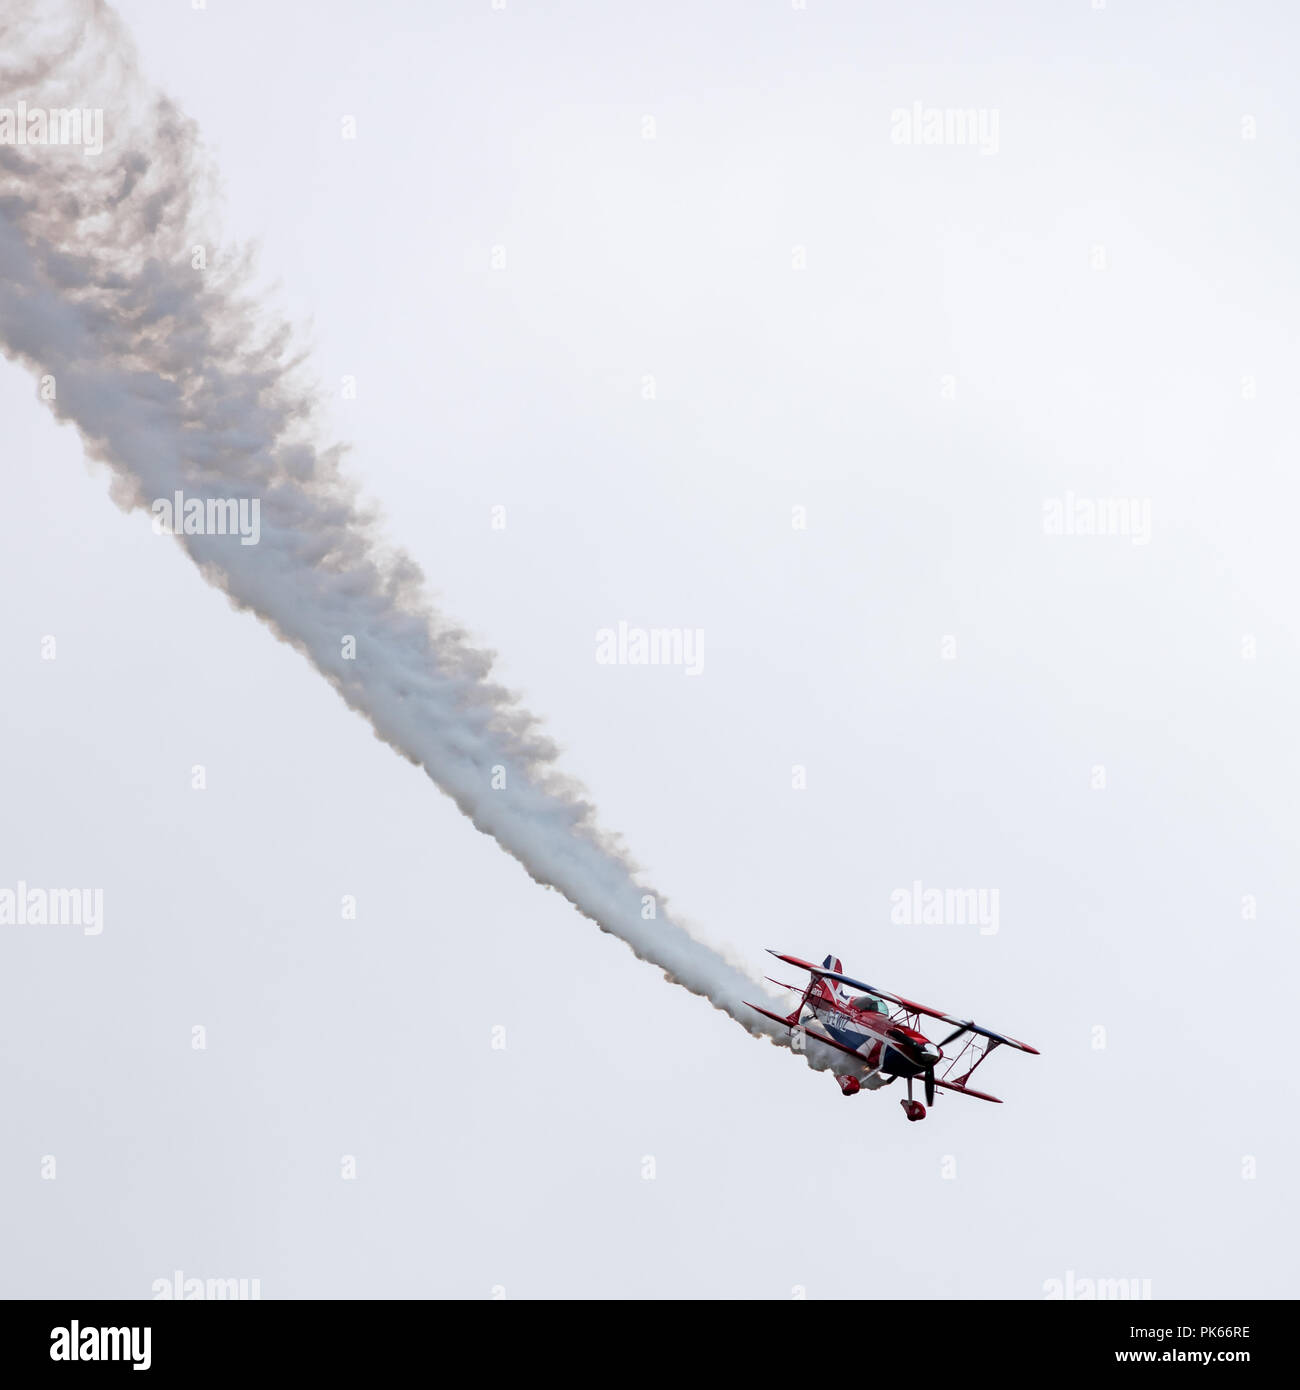 A Pitts Special S2S Biplane with a 8.5 ltre Lycoming 540 engine performing an aerobatics routine Stock Photo